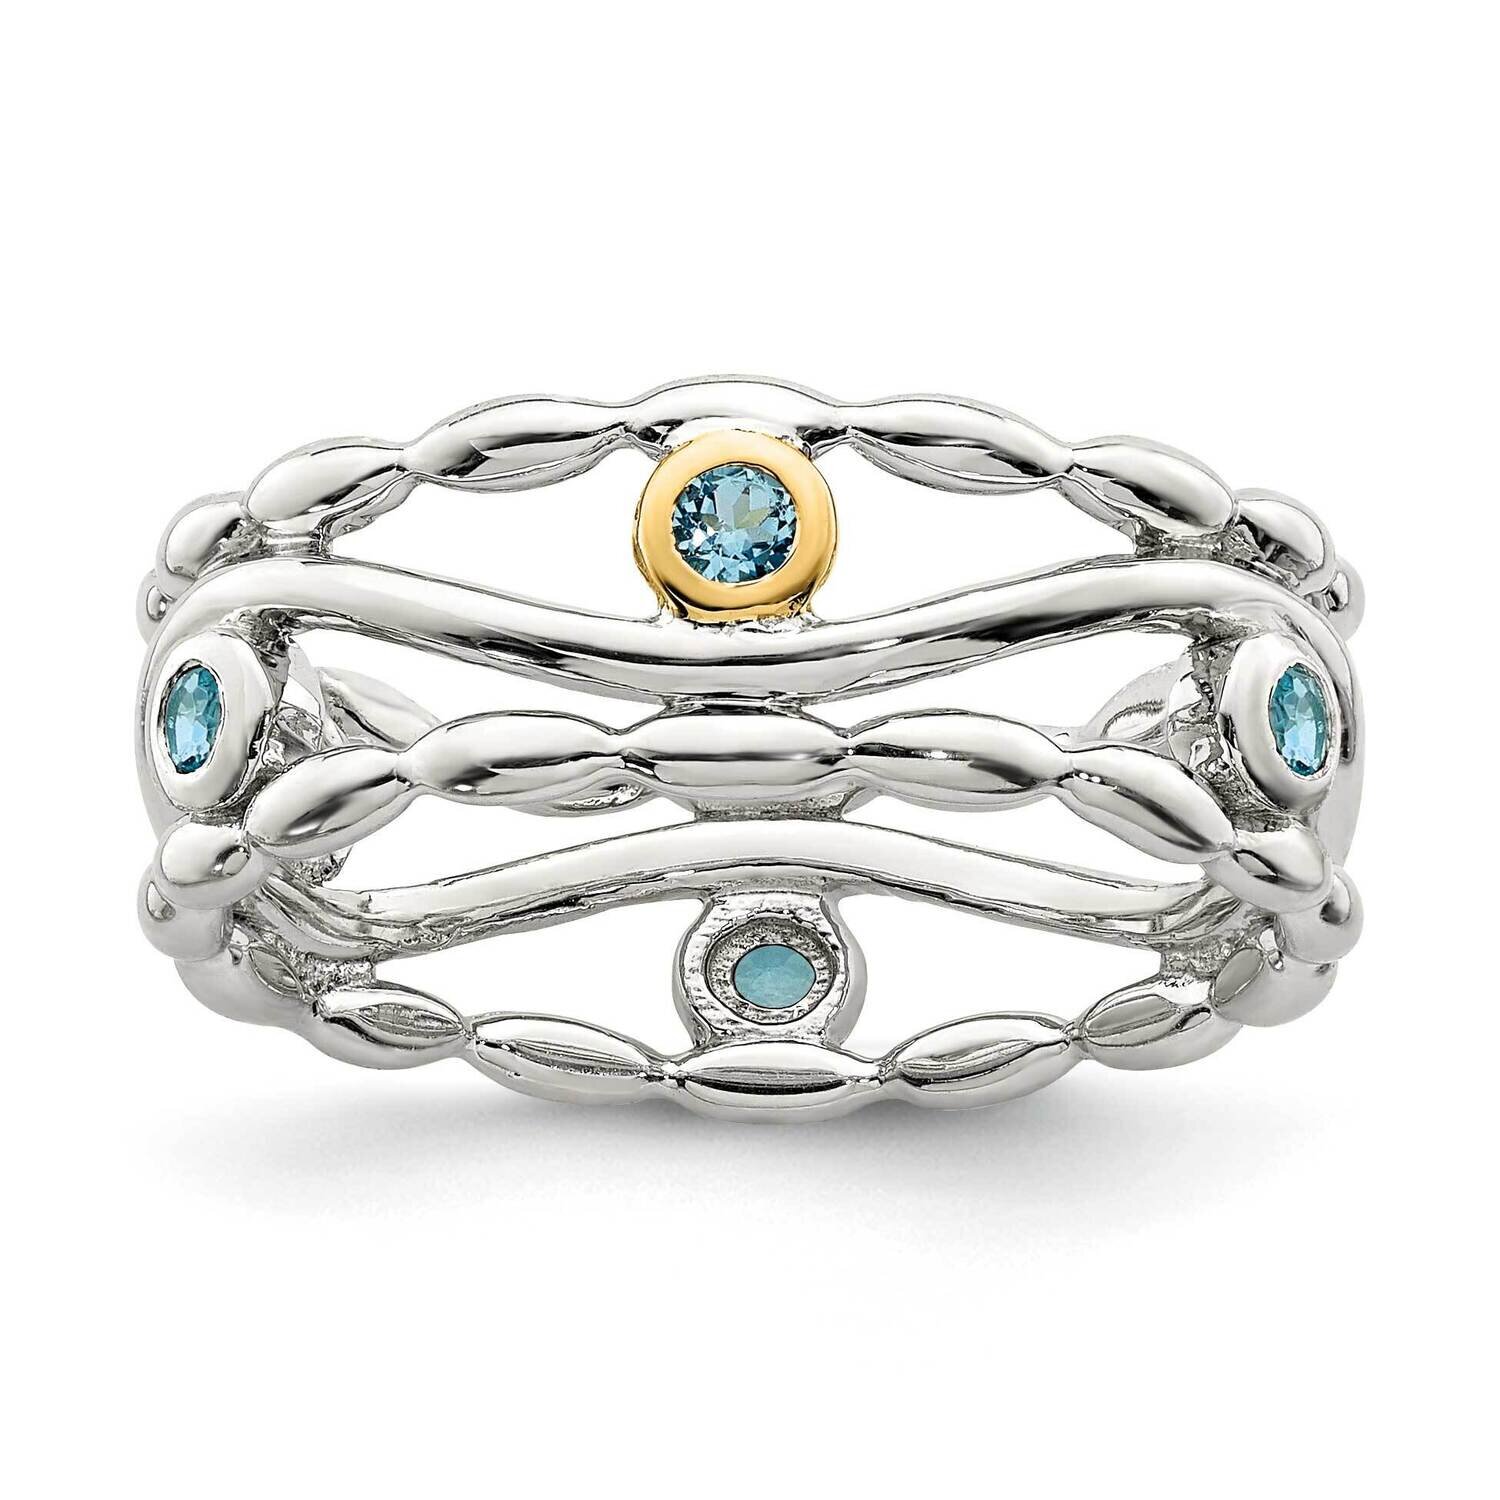 Light Swiss Blue Topaz Ring Sterling Silver with 14k Gold Accent QTC1606